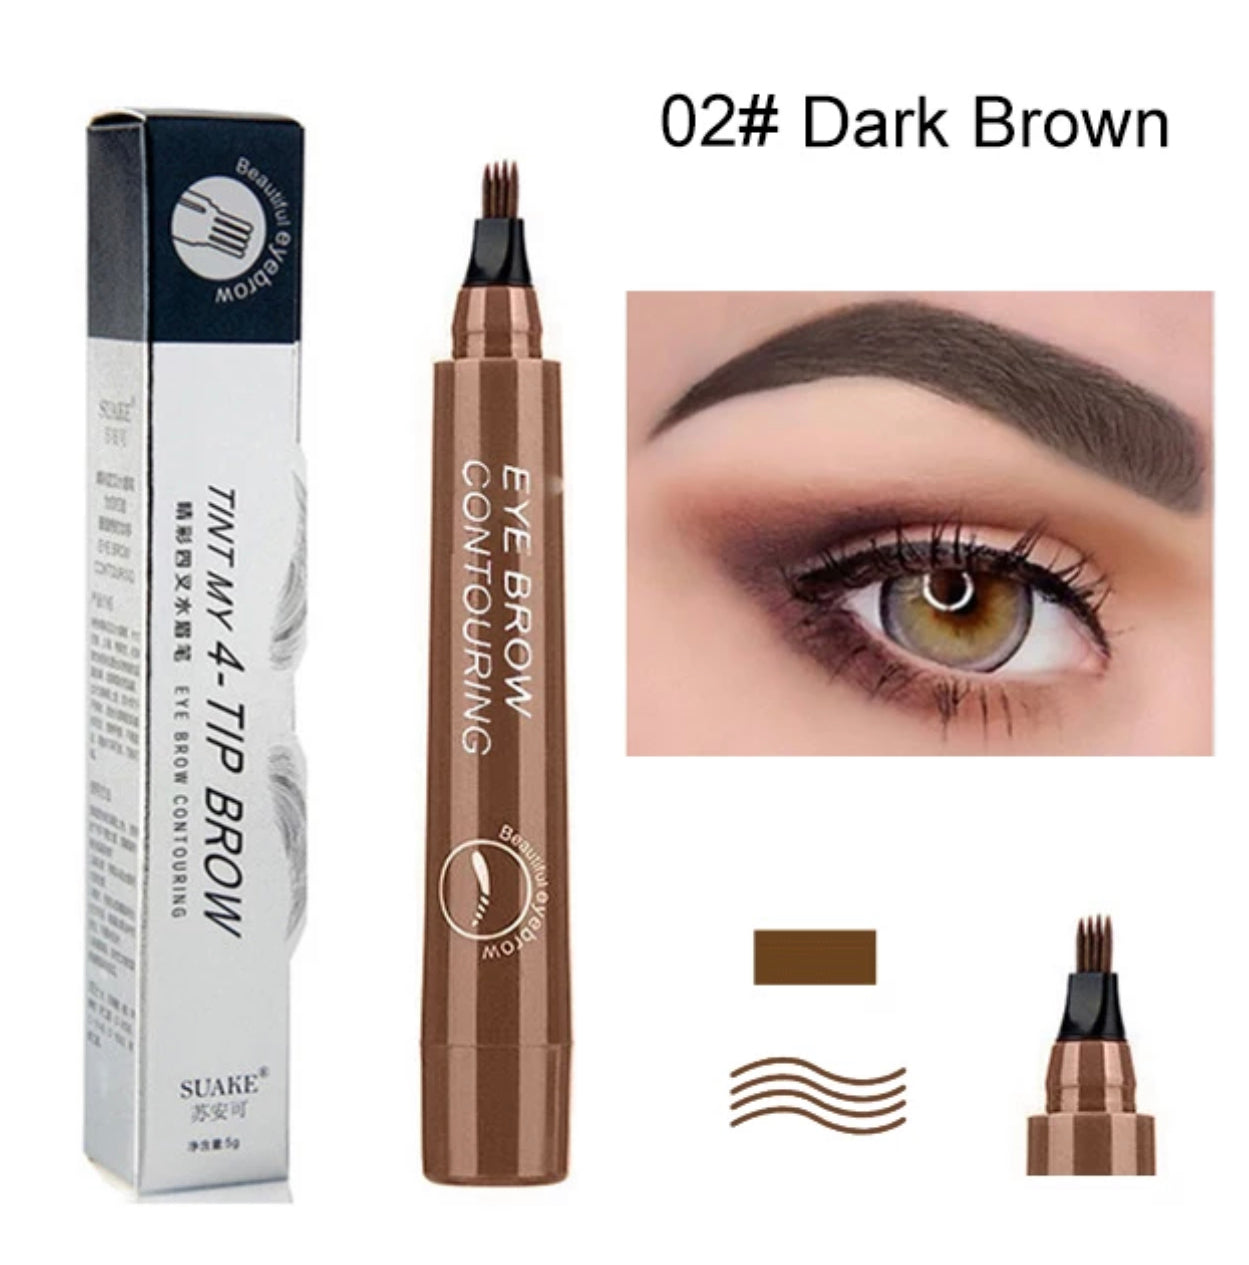 Microblading Eyebrow Waterproof Fork Tip Pen, Create Long Lasting, Natural Hair-Like Defined Brows All Day